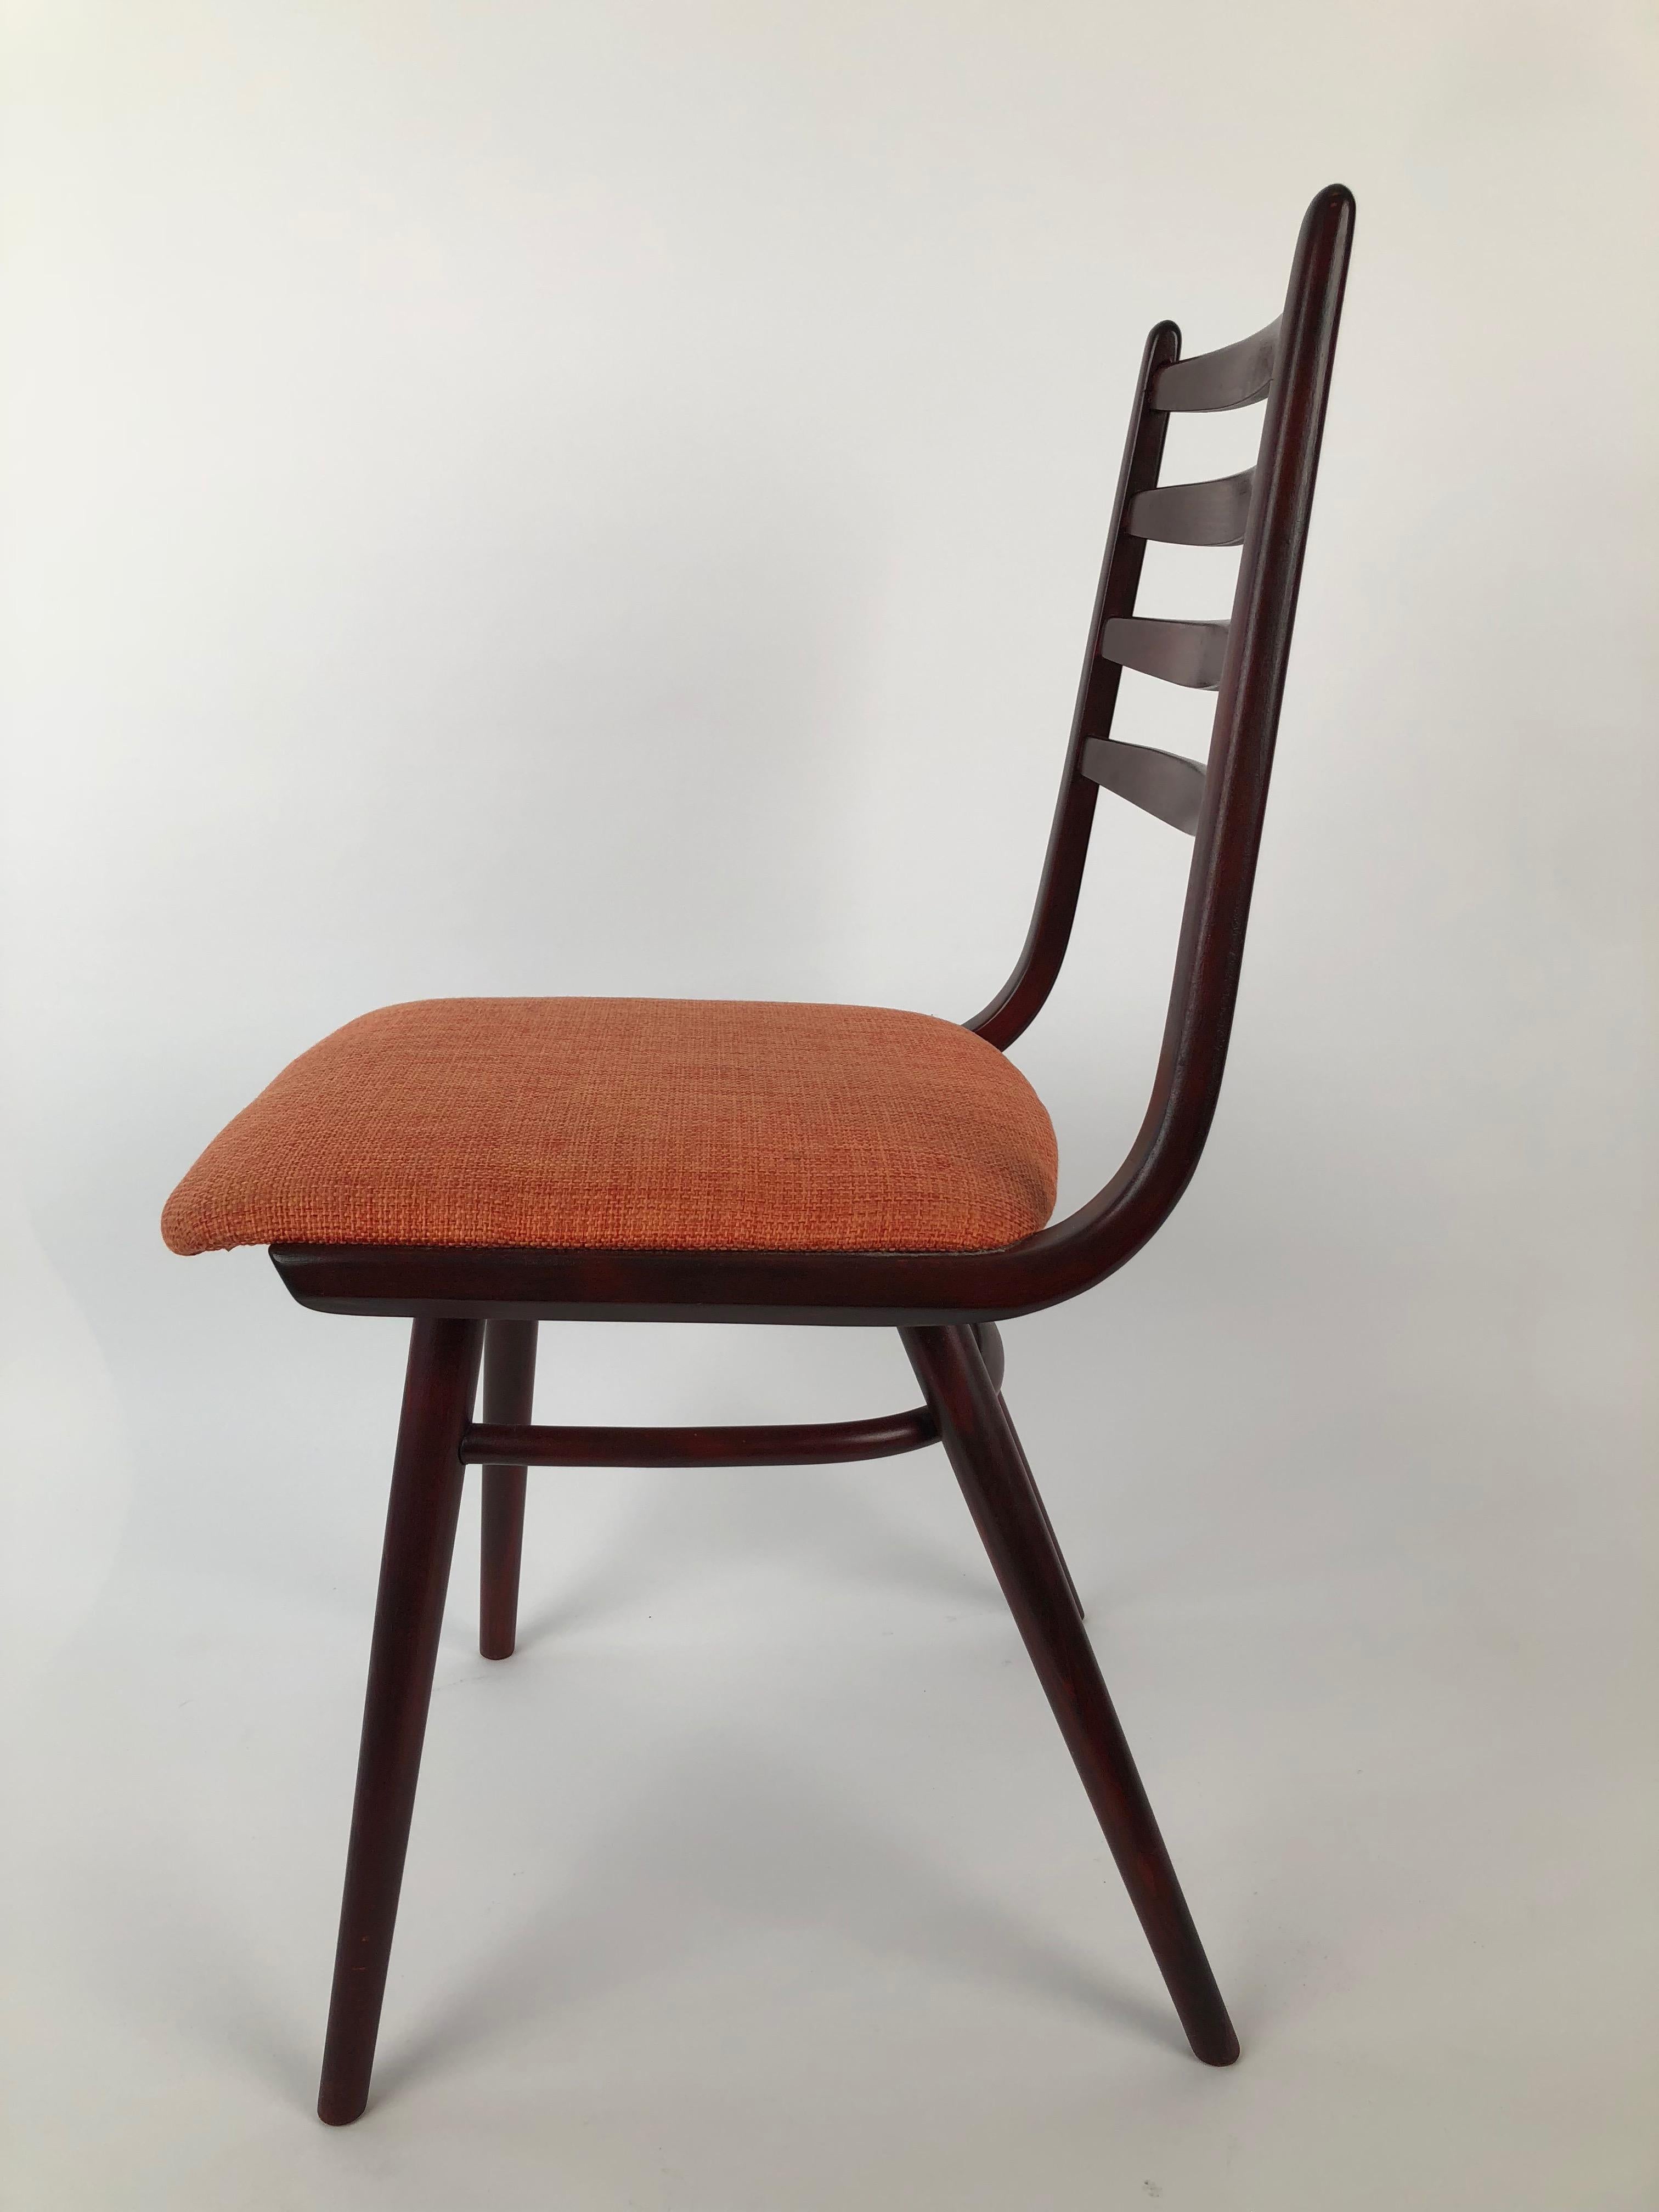 Set of 4 dining chairs made from steamed bentwood, produced in 1970, at the factory Ton in Bystrice pod Hostýnem, Czechoslovakia.
Factory Ton was the original Thonet factory, that in latter years continued to produced bentwood chairs in new